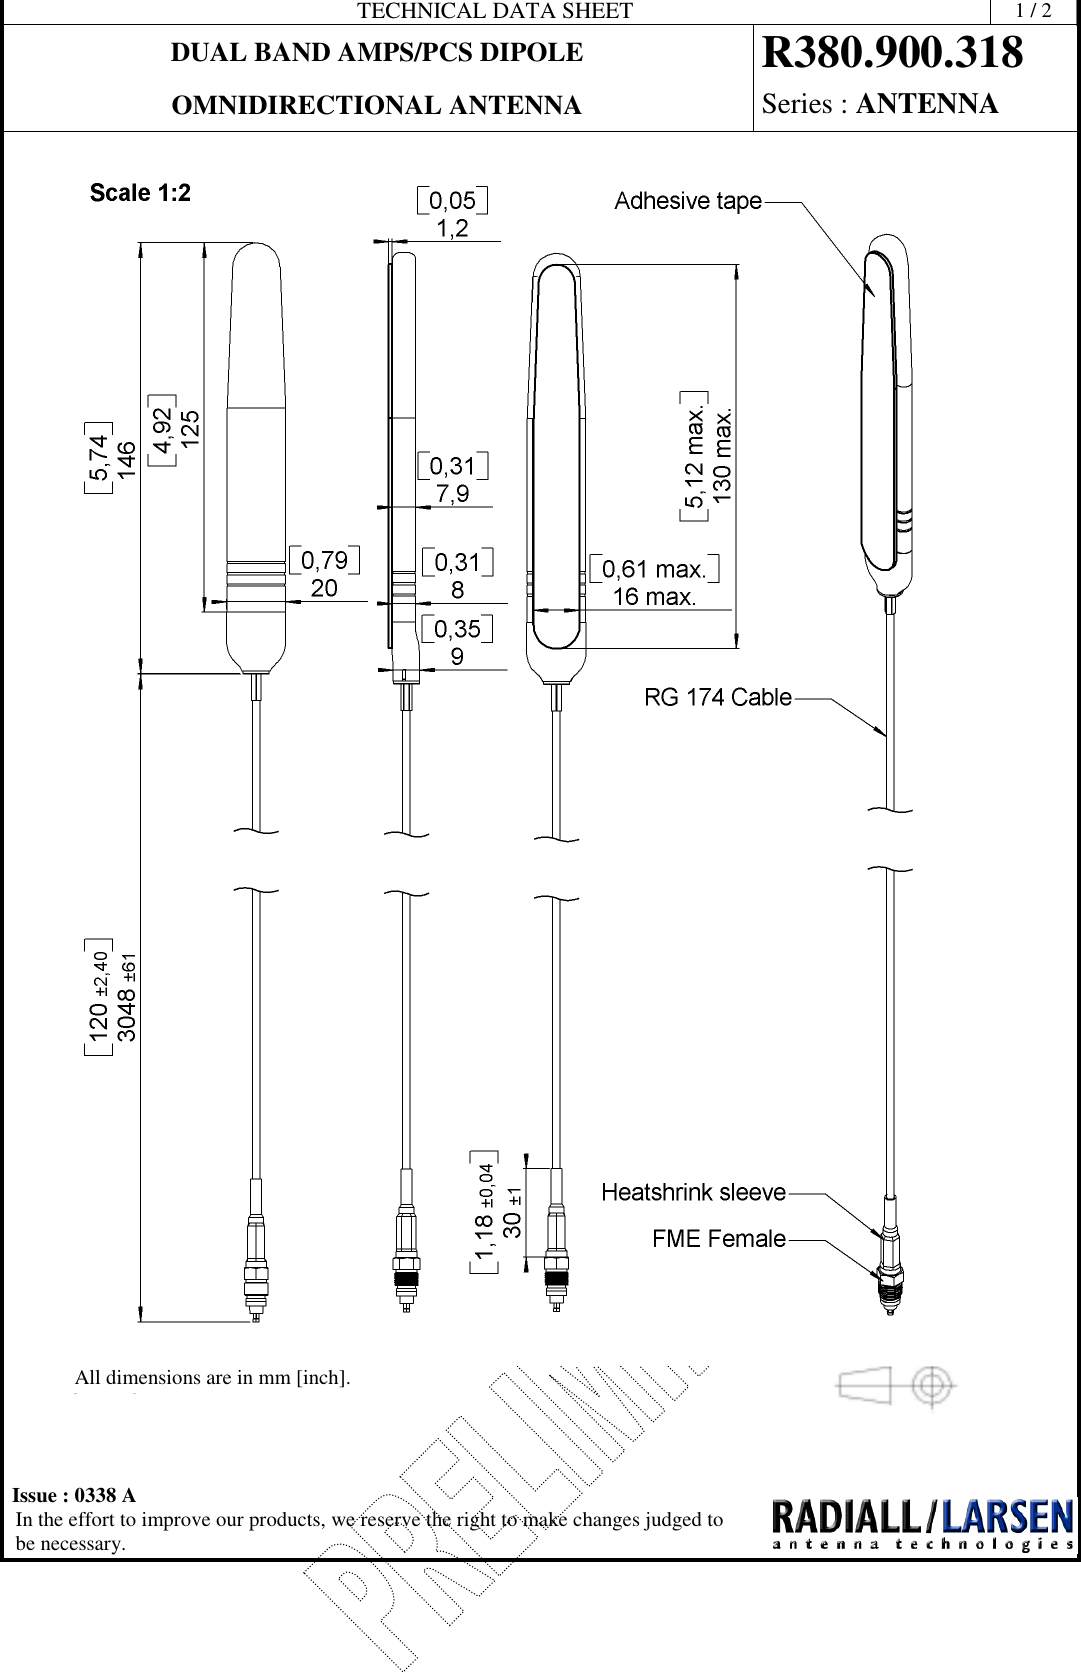 TECHNICAL DATA SHEET 1/2DUAL BAND AMPS/PCS DIPOLE R380.900.318OMNIDIRECTIONAL ANTENNA Series : ANTENNAIssue : 0338 AIn the effort to improve our products, we reserve the right to make changes judged tobe necessary.All dimensions are in mm [inch]...po ao